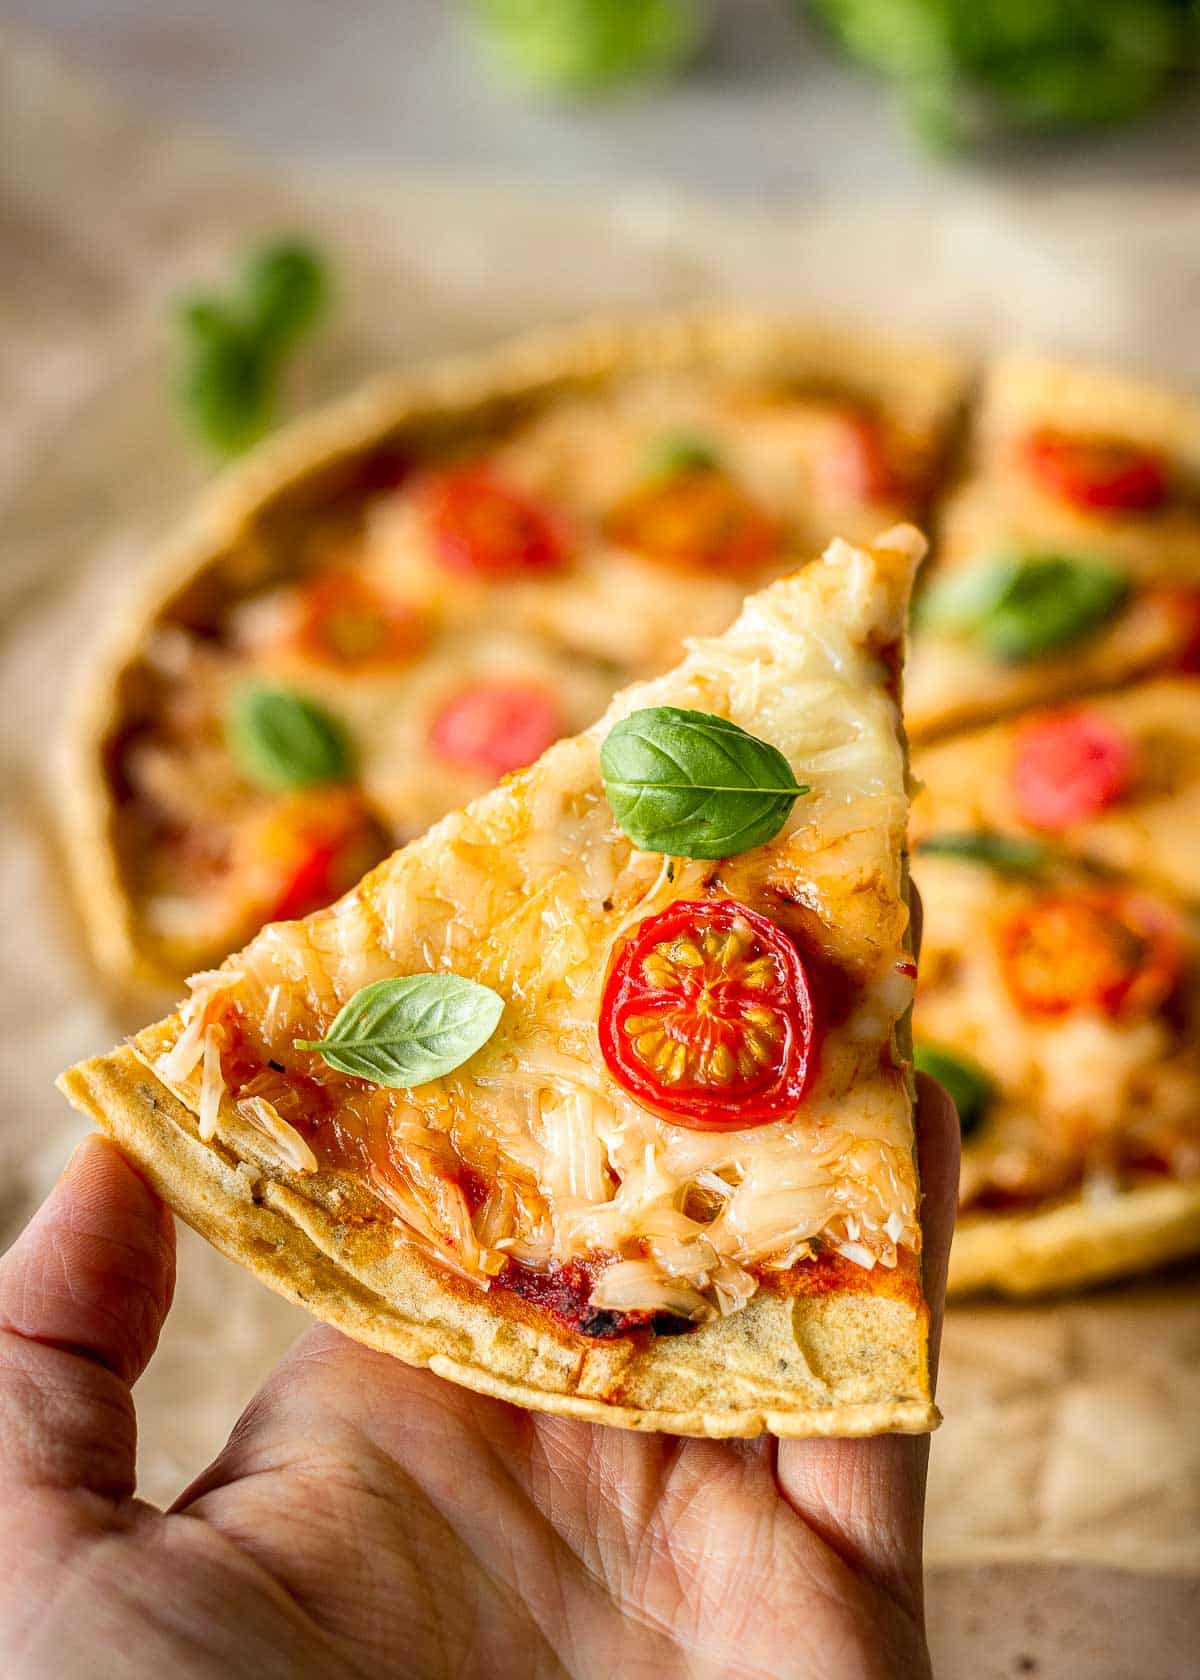 A woman's hand holds a slice of chickpea flour pizza, topped with cheese, cherry tomatoes and basil leaves. The rest of the pizza is in the background.